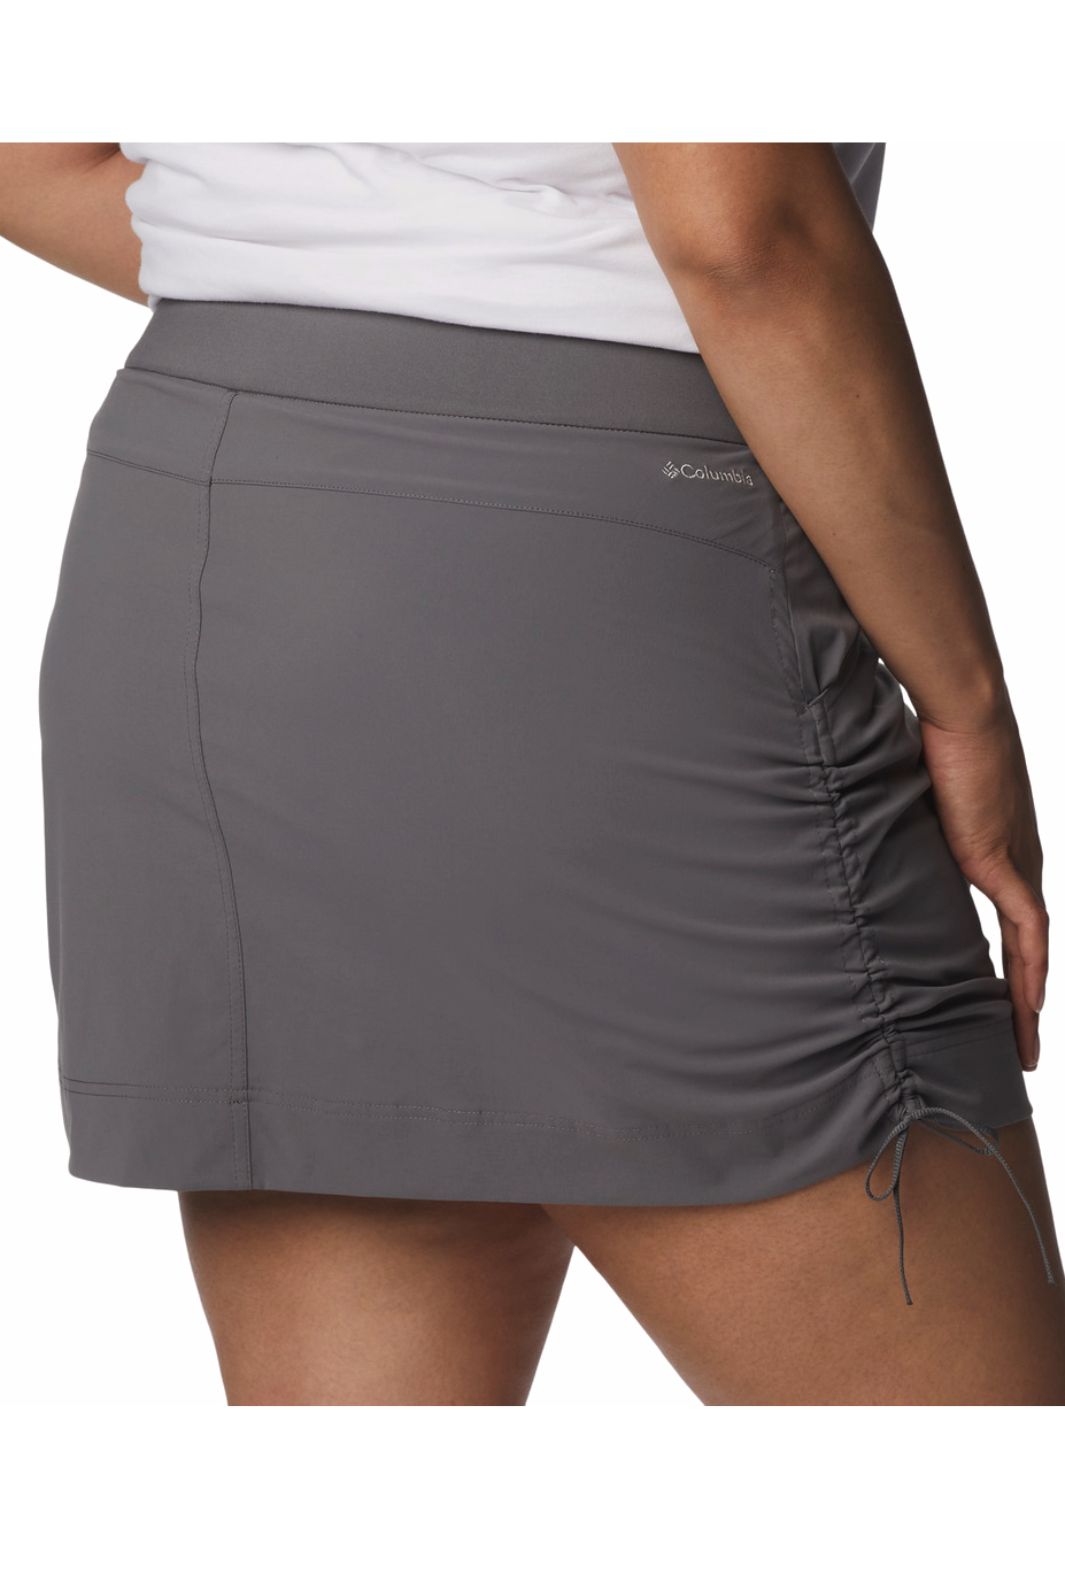 Jupe-Culotte Anytime Casual™ Taille Plus de Columbia